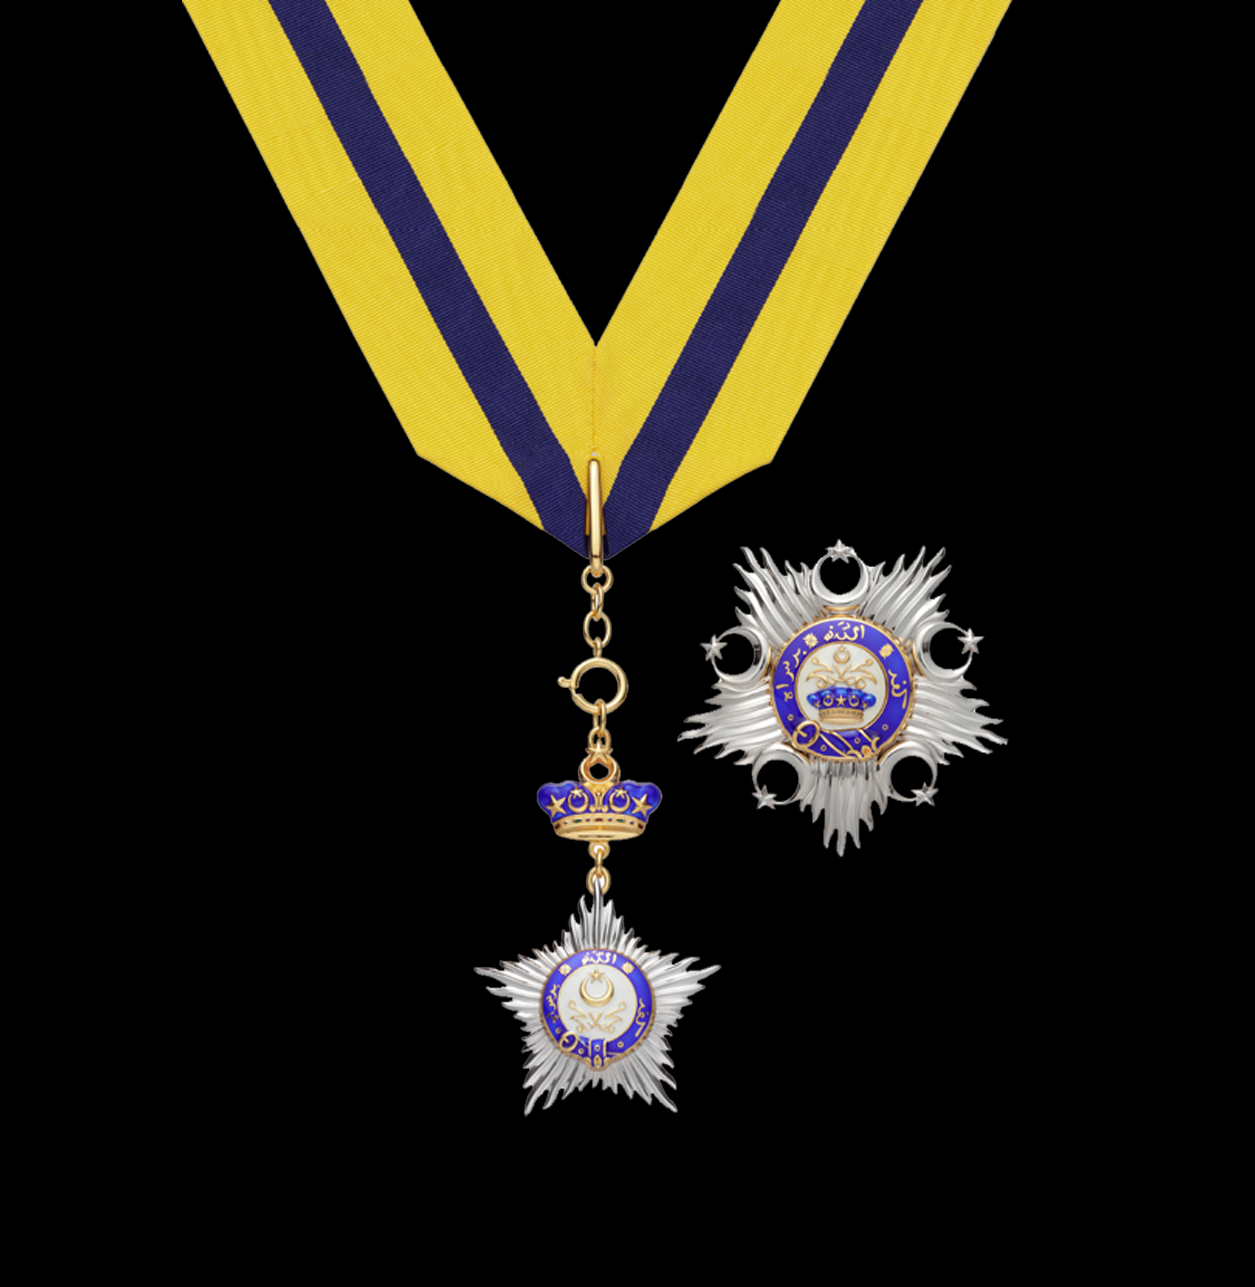 The Most Honorable Order of The Crown of Johor